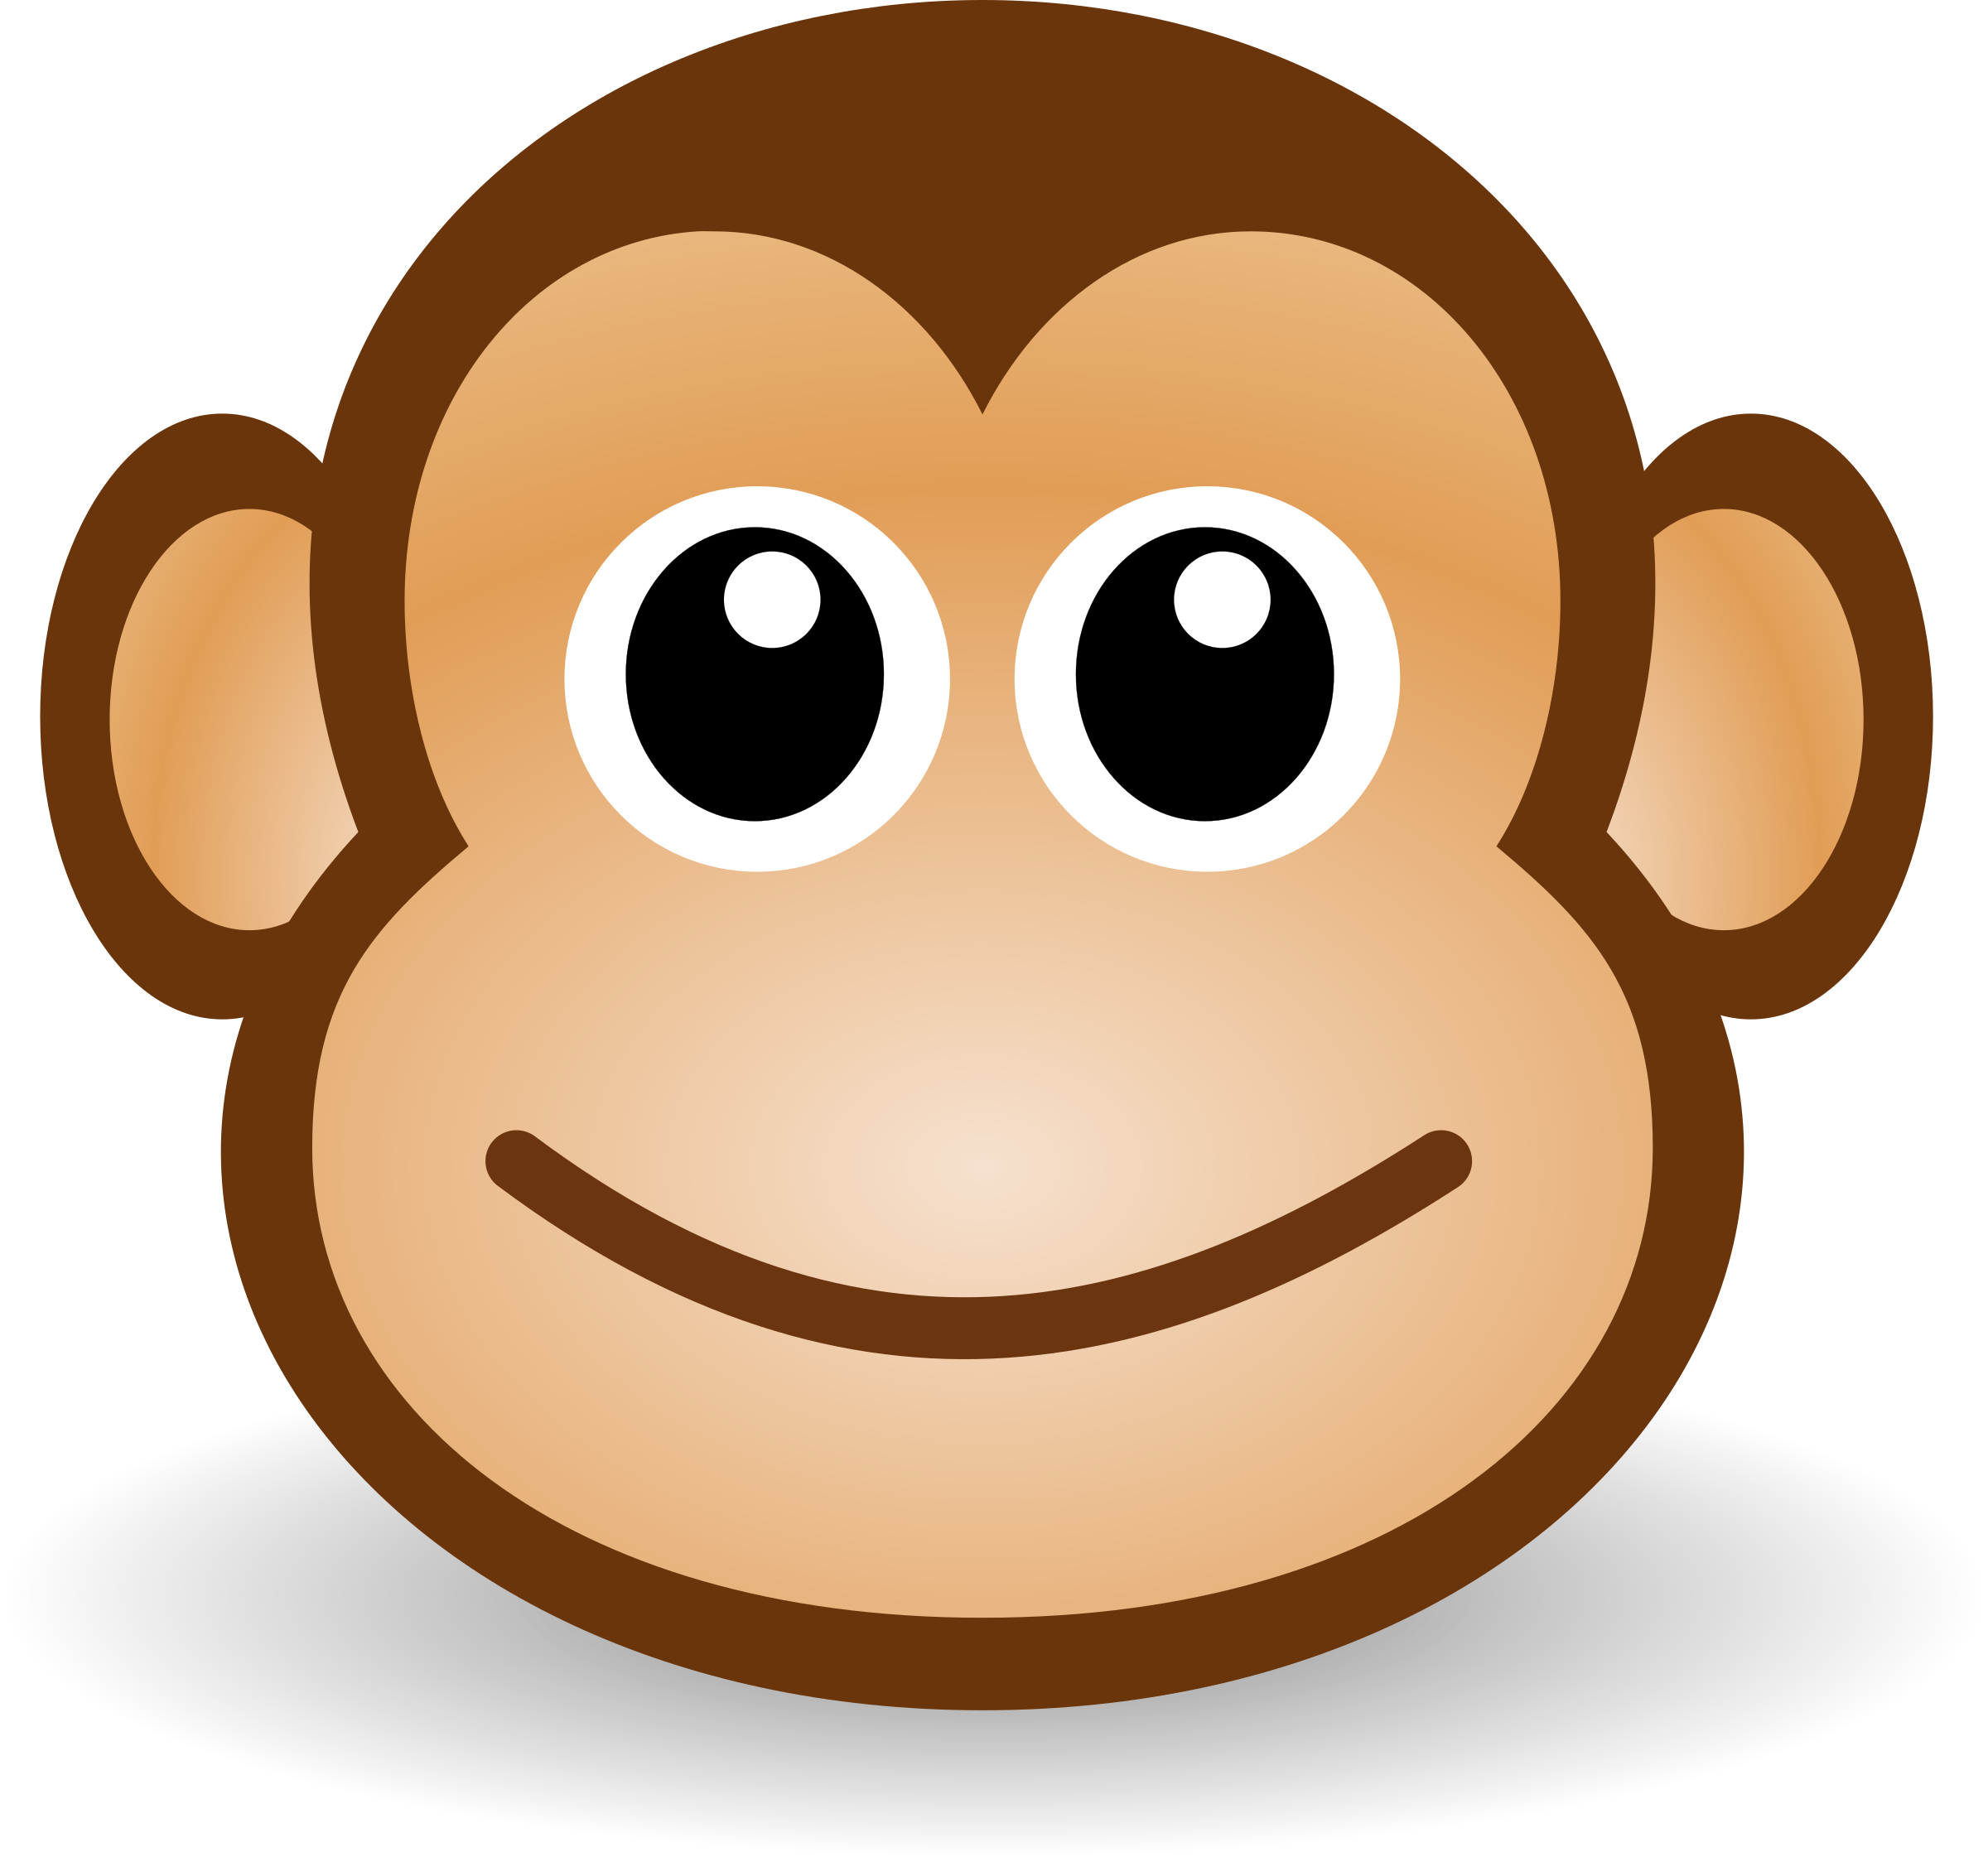 Woodland clipart faces. Funny monkey face by